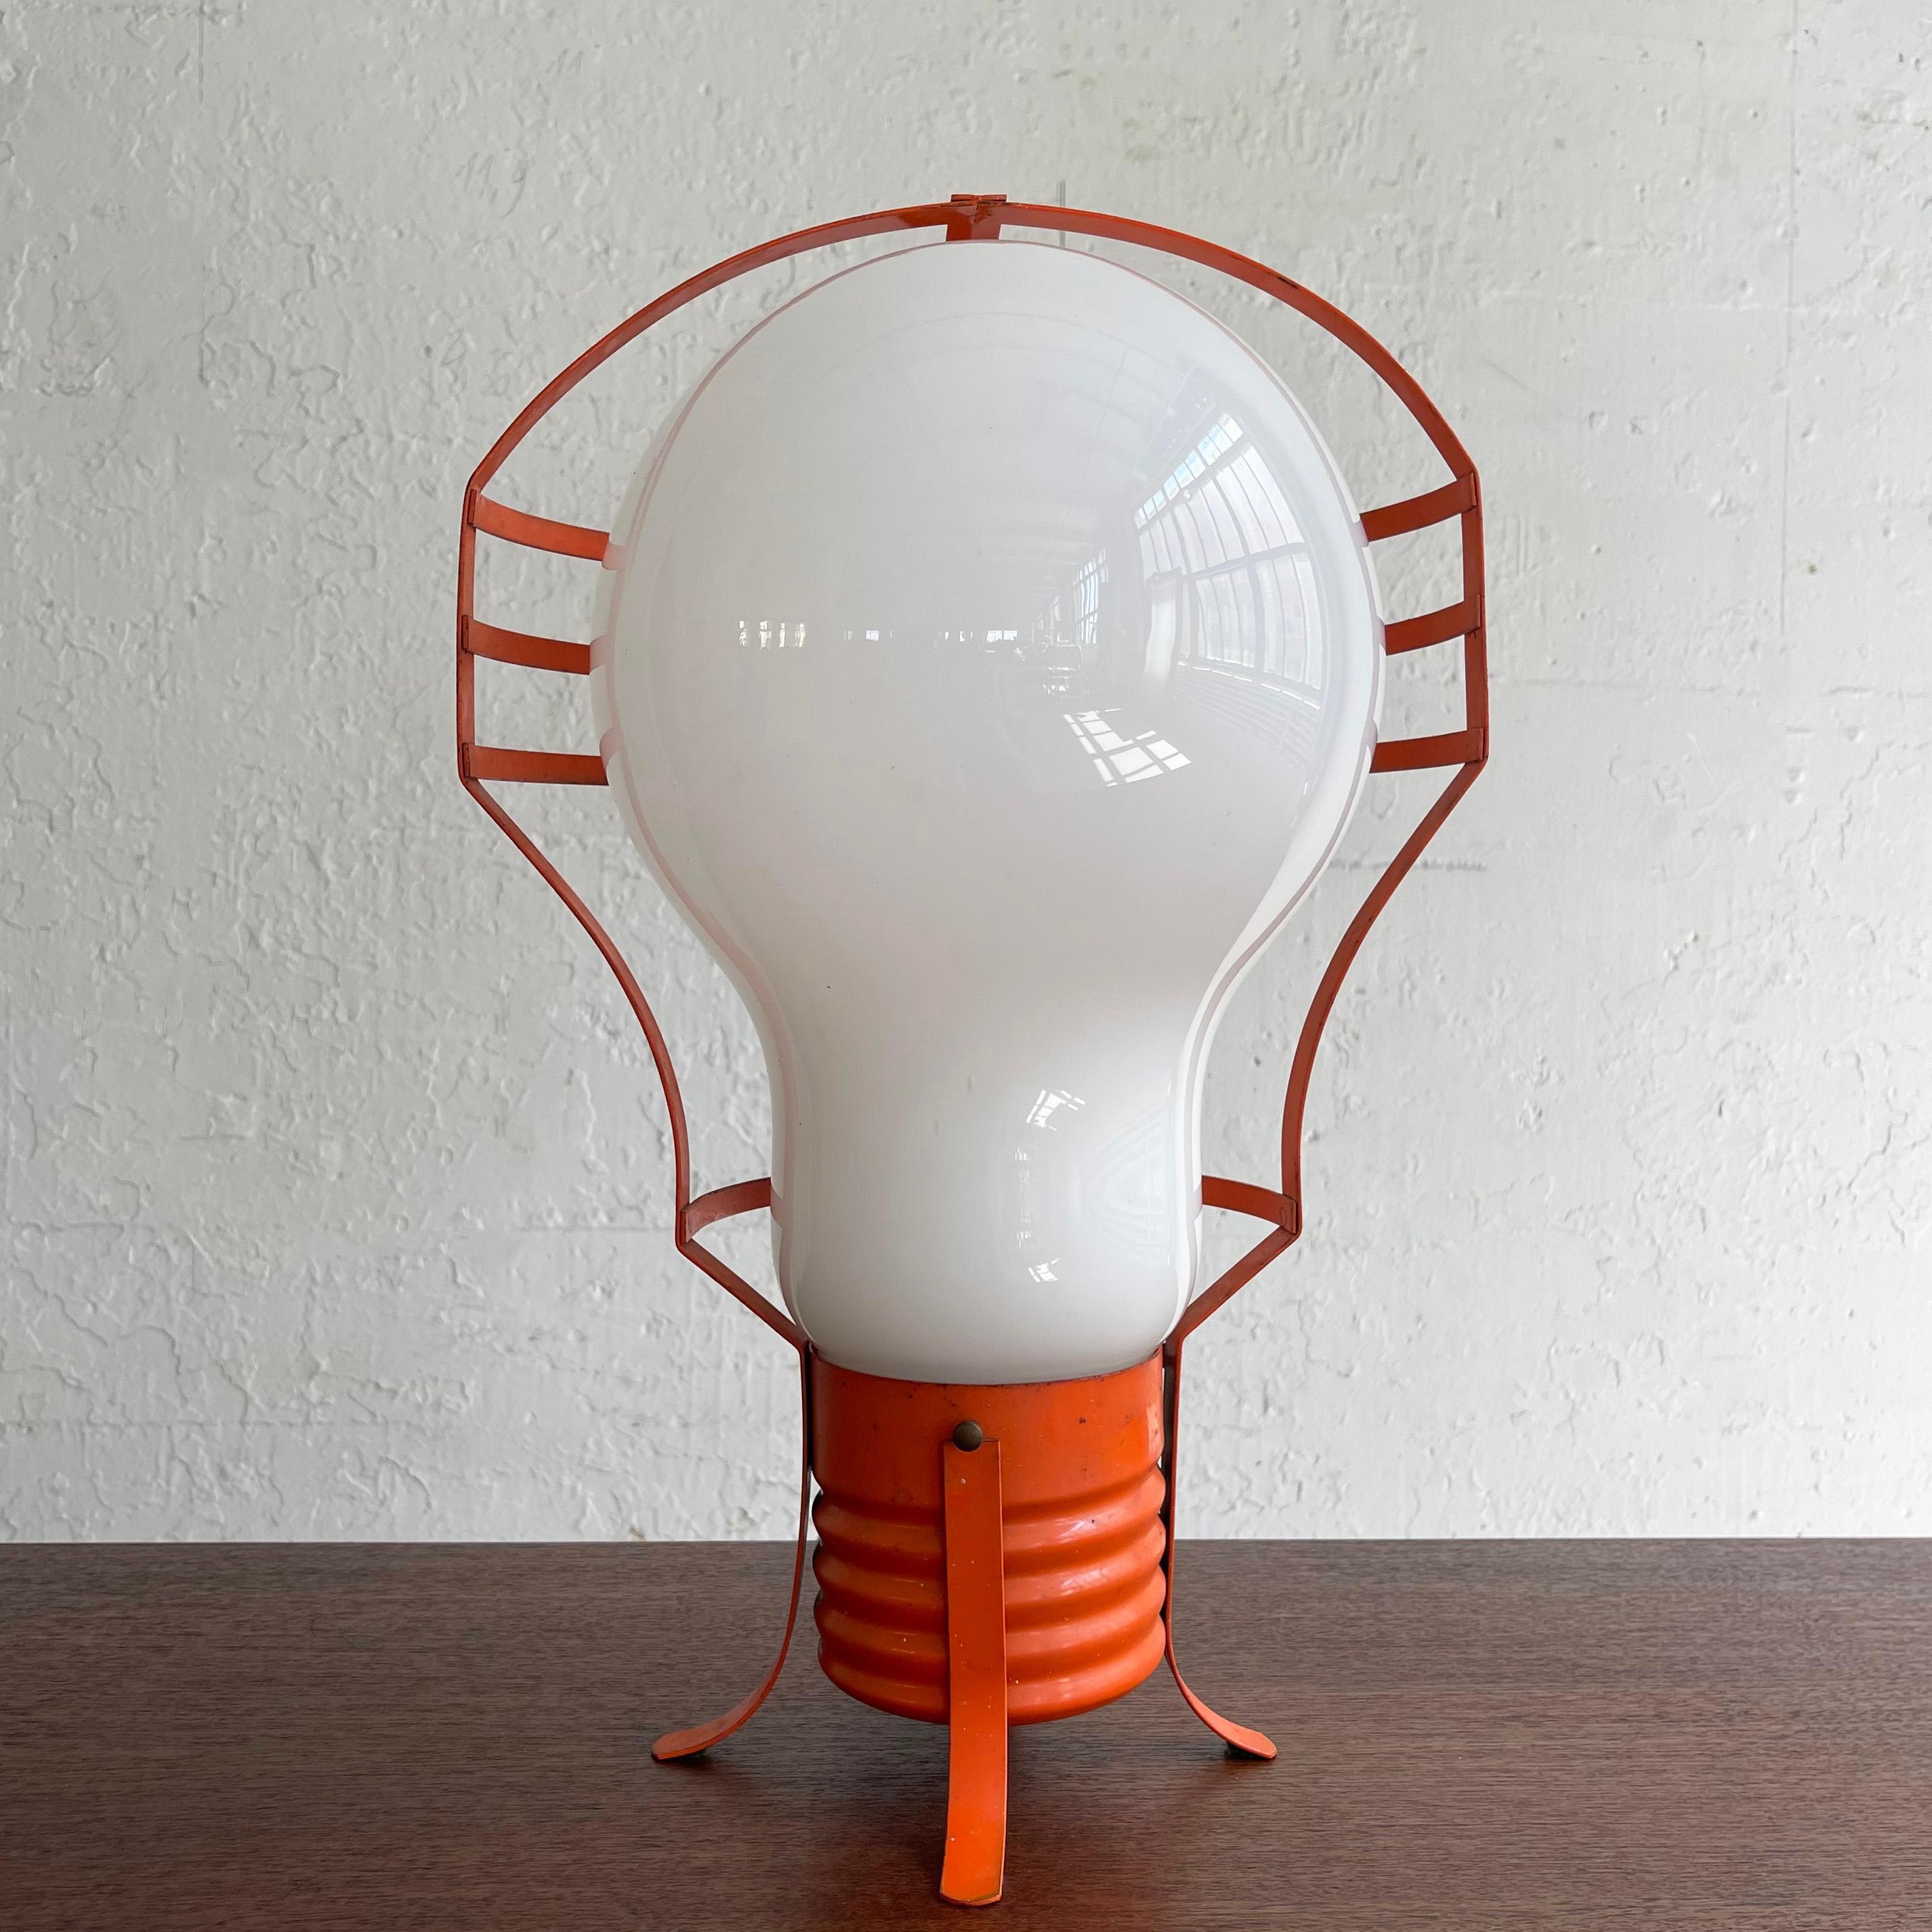 Mod, Italian, Mid-Century Modern, pop art, table lamp features an oversized milk glass light bulb shade within an orange lacquered metal frame. The lamp can sit upright on it's base or rest on it's side.